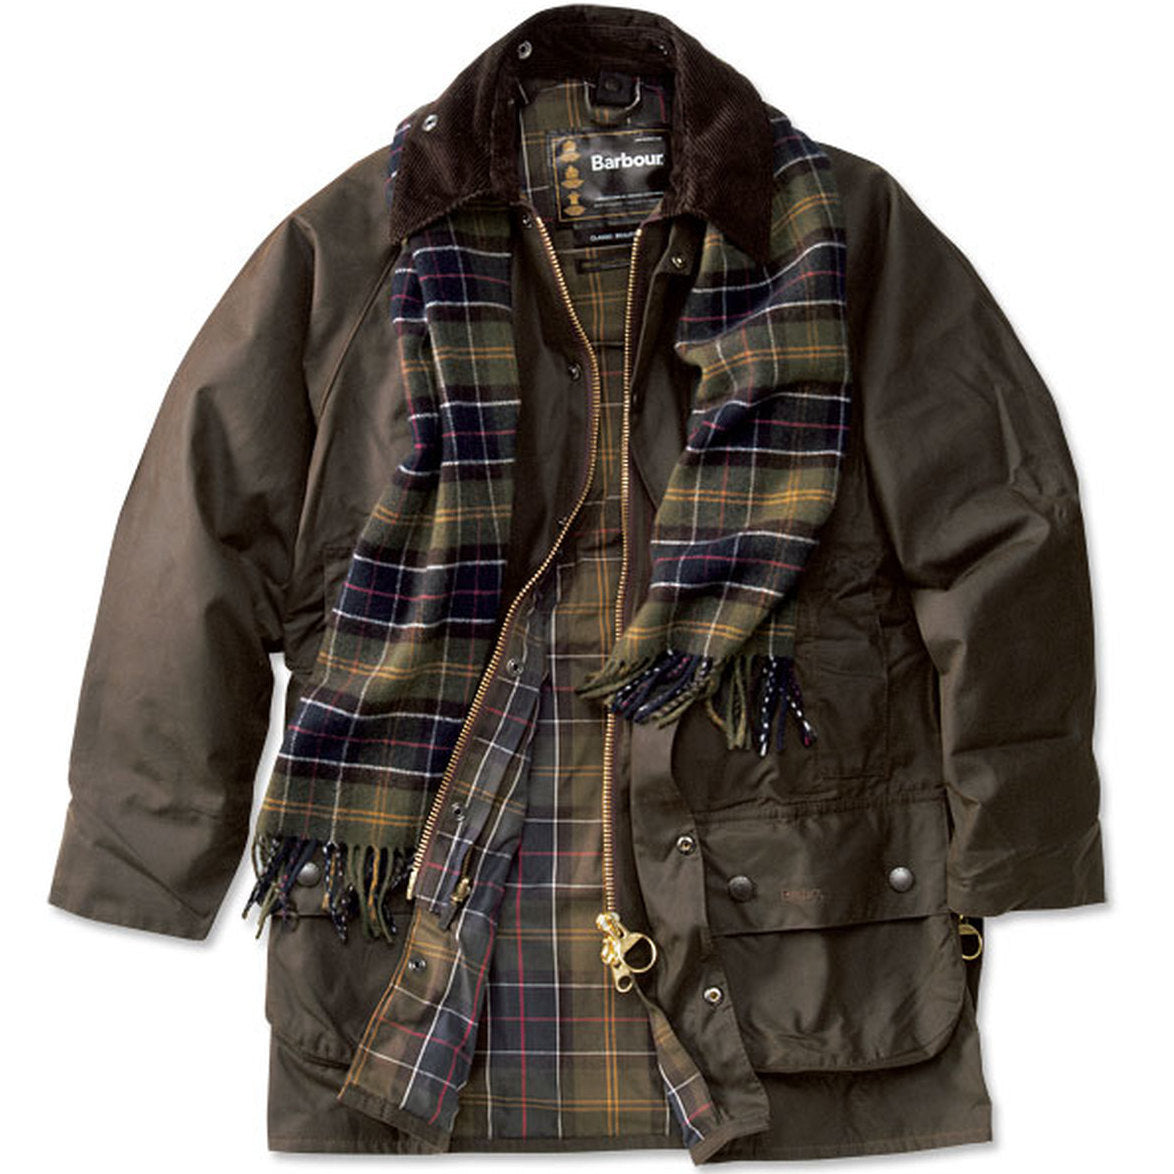 Barbour Beaufort Classic Wax Jacket in Olive MWX0002OL71 – Smyths ...